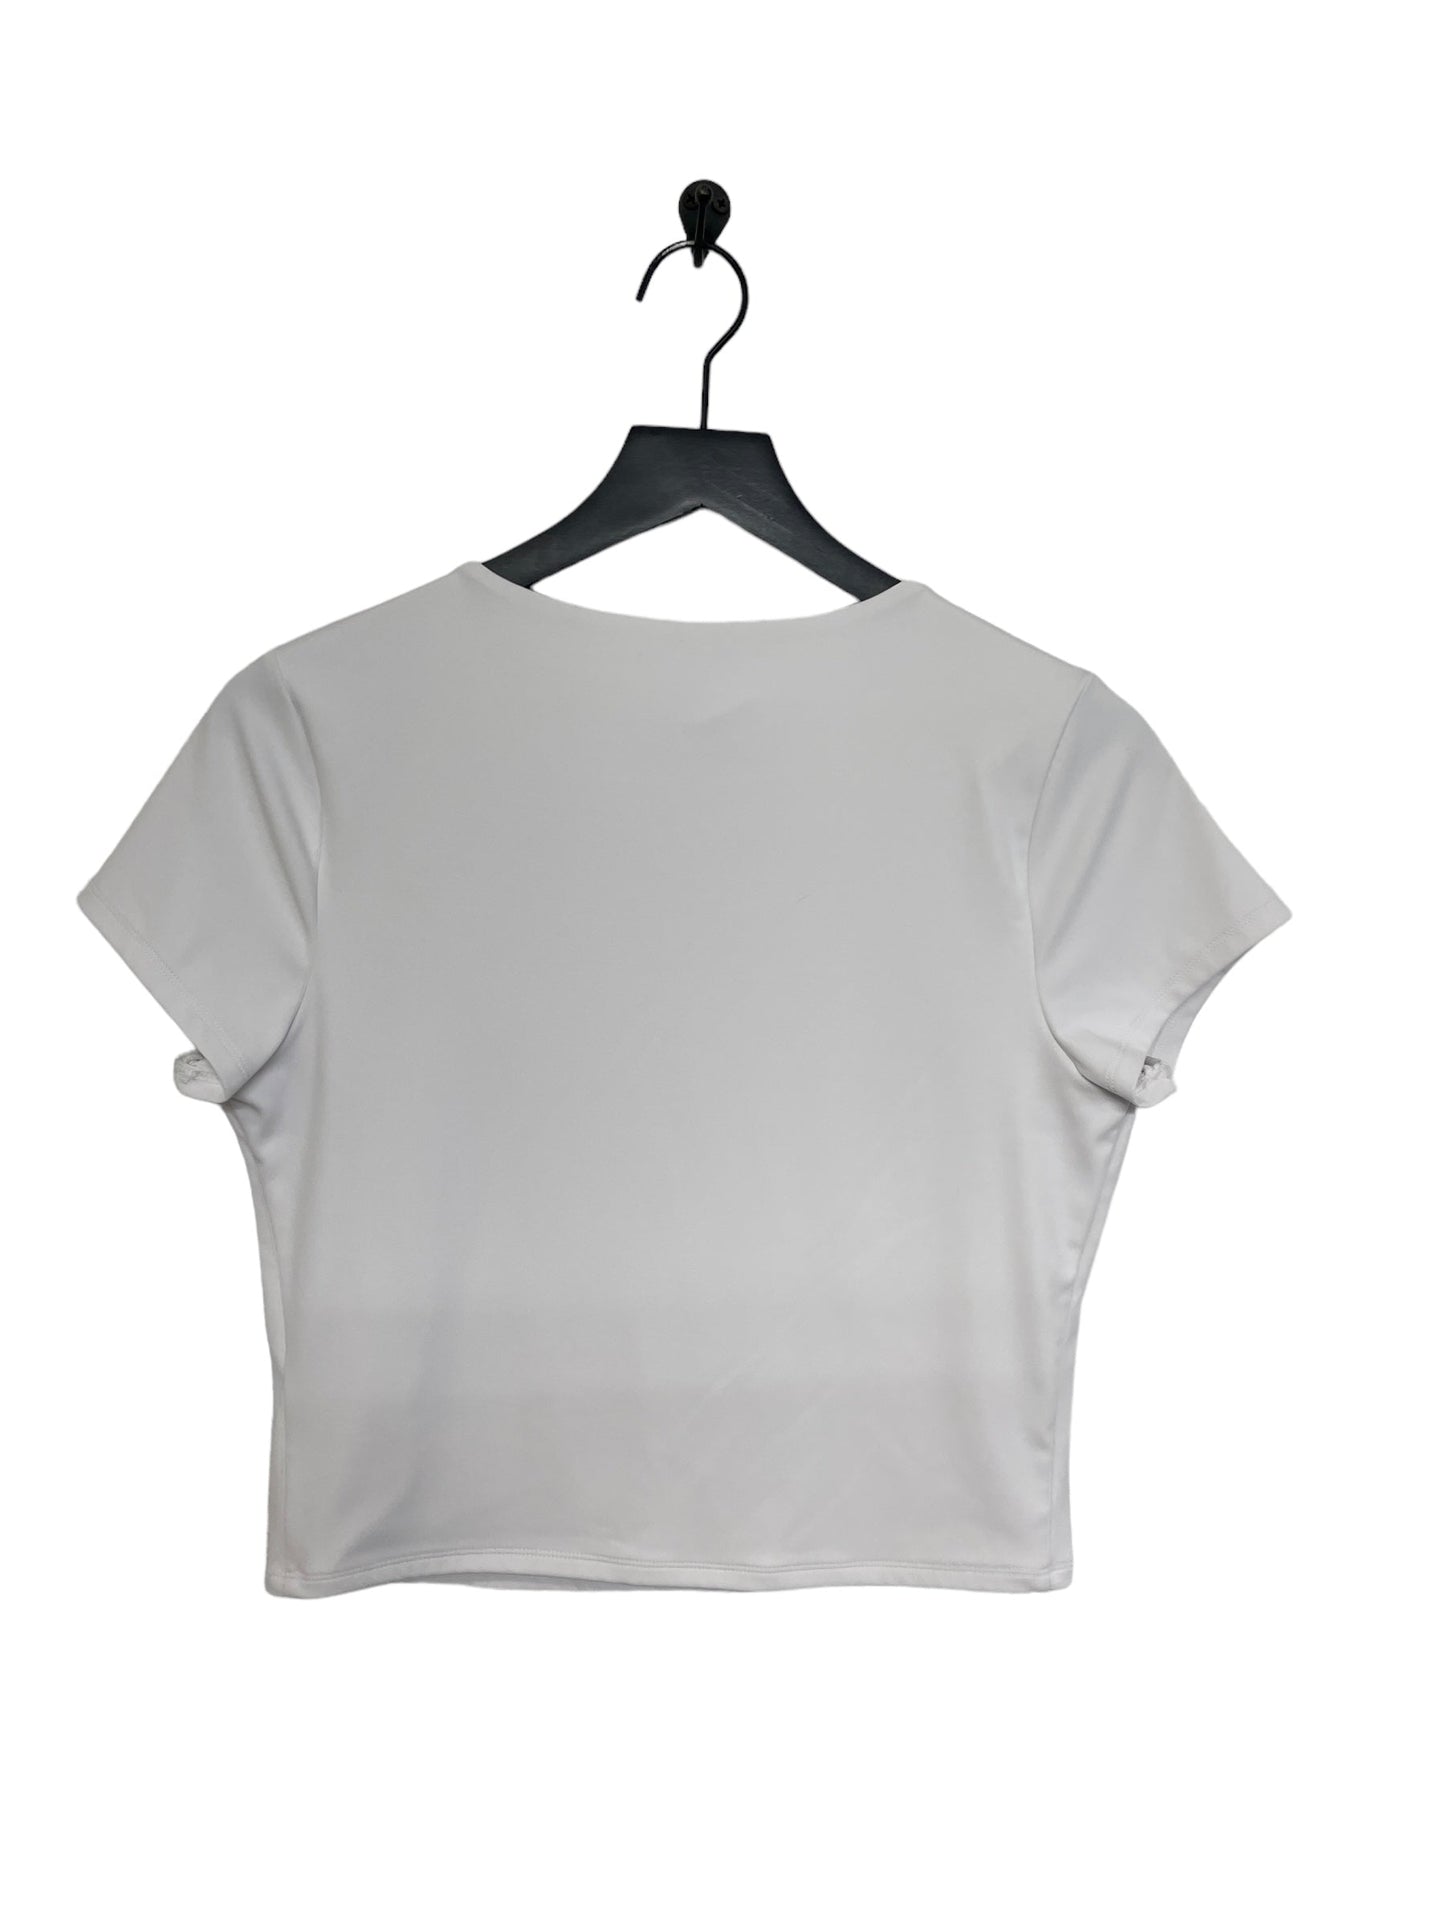 White Top Short Sleeve Express, Size L